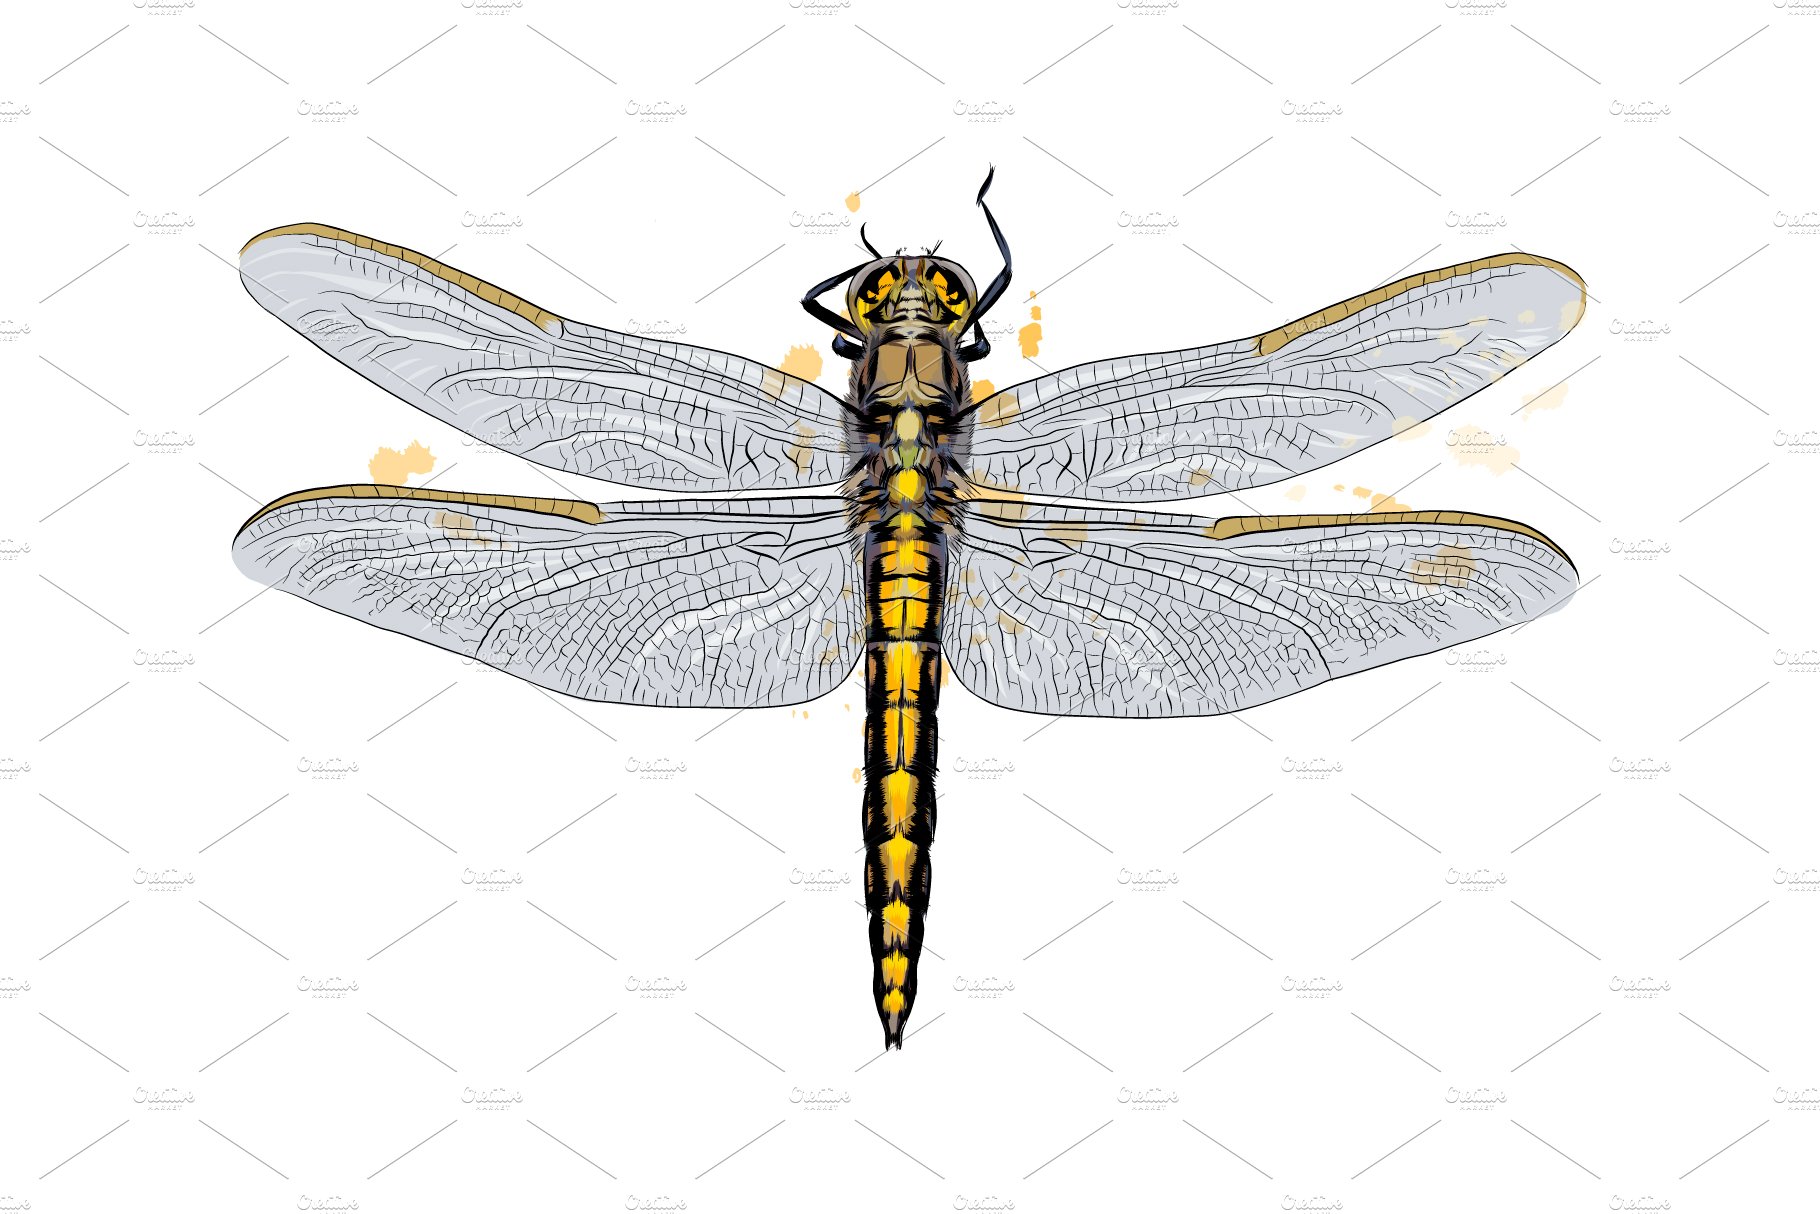 Dragonfly from a splash cover image.